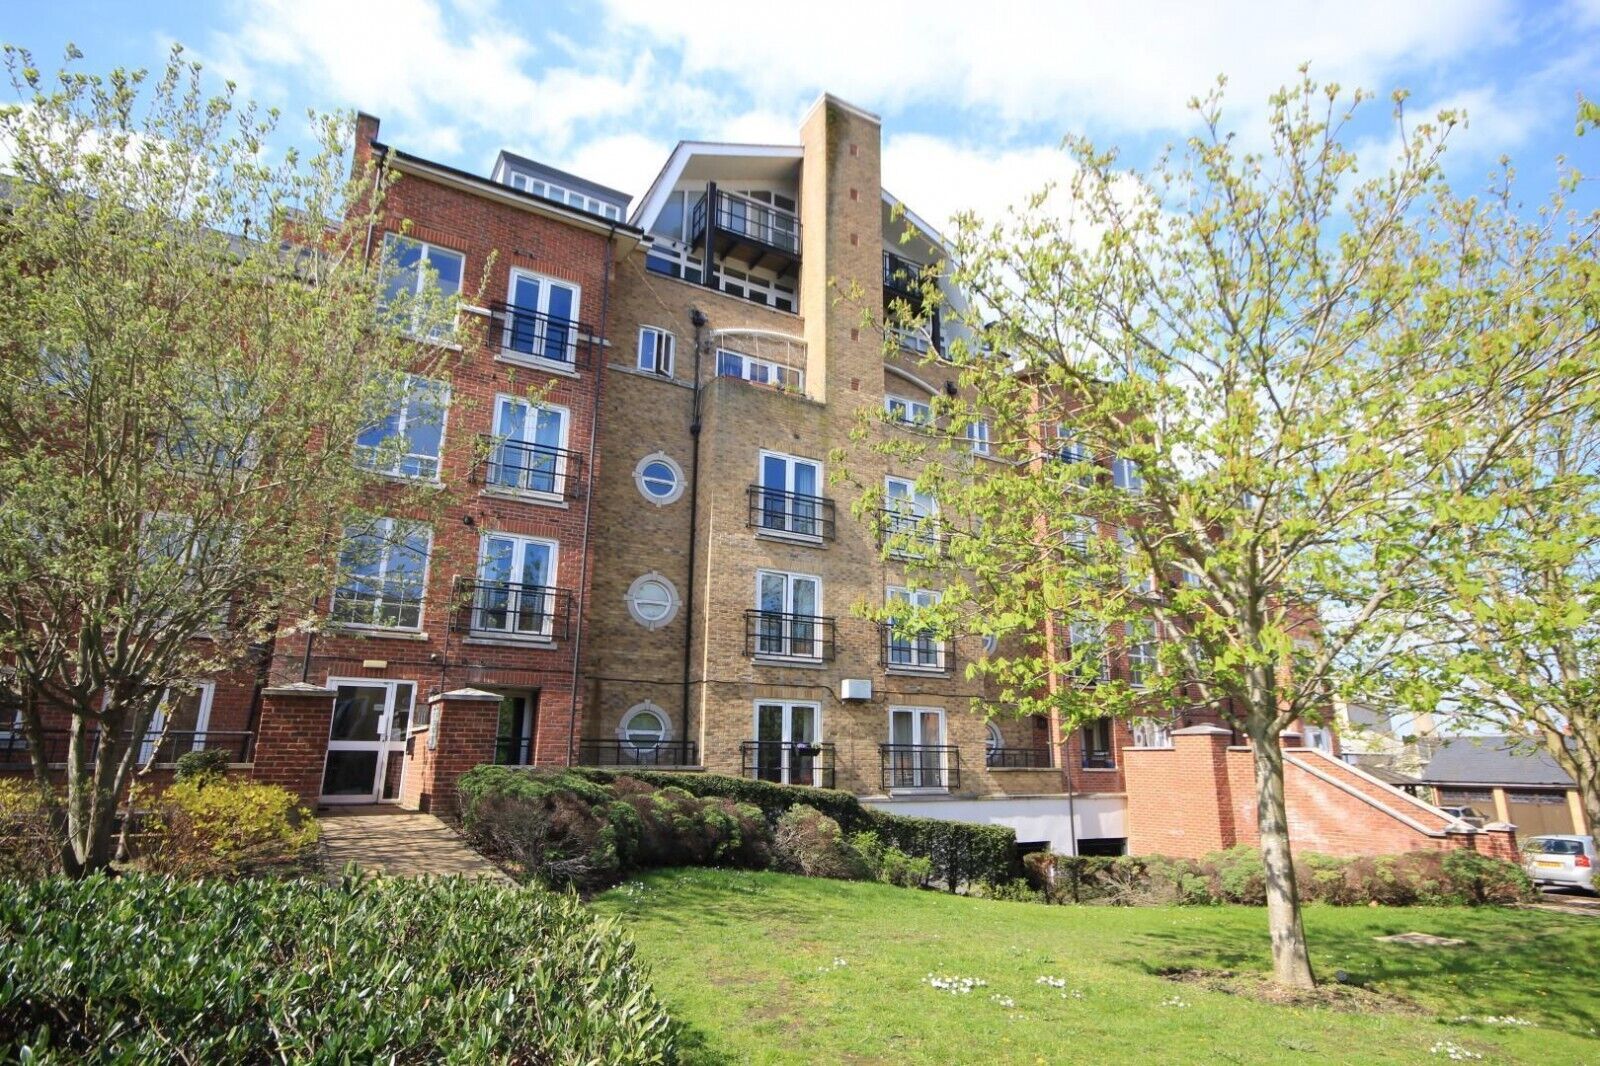 2 bedroom  flat for sale Aveley House, Iliffe Close, RG1, main image